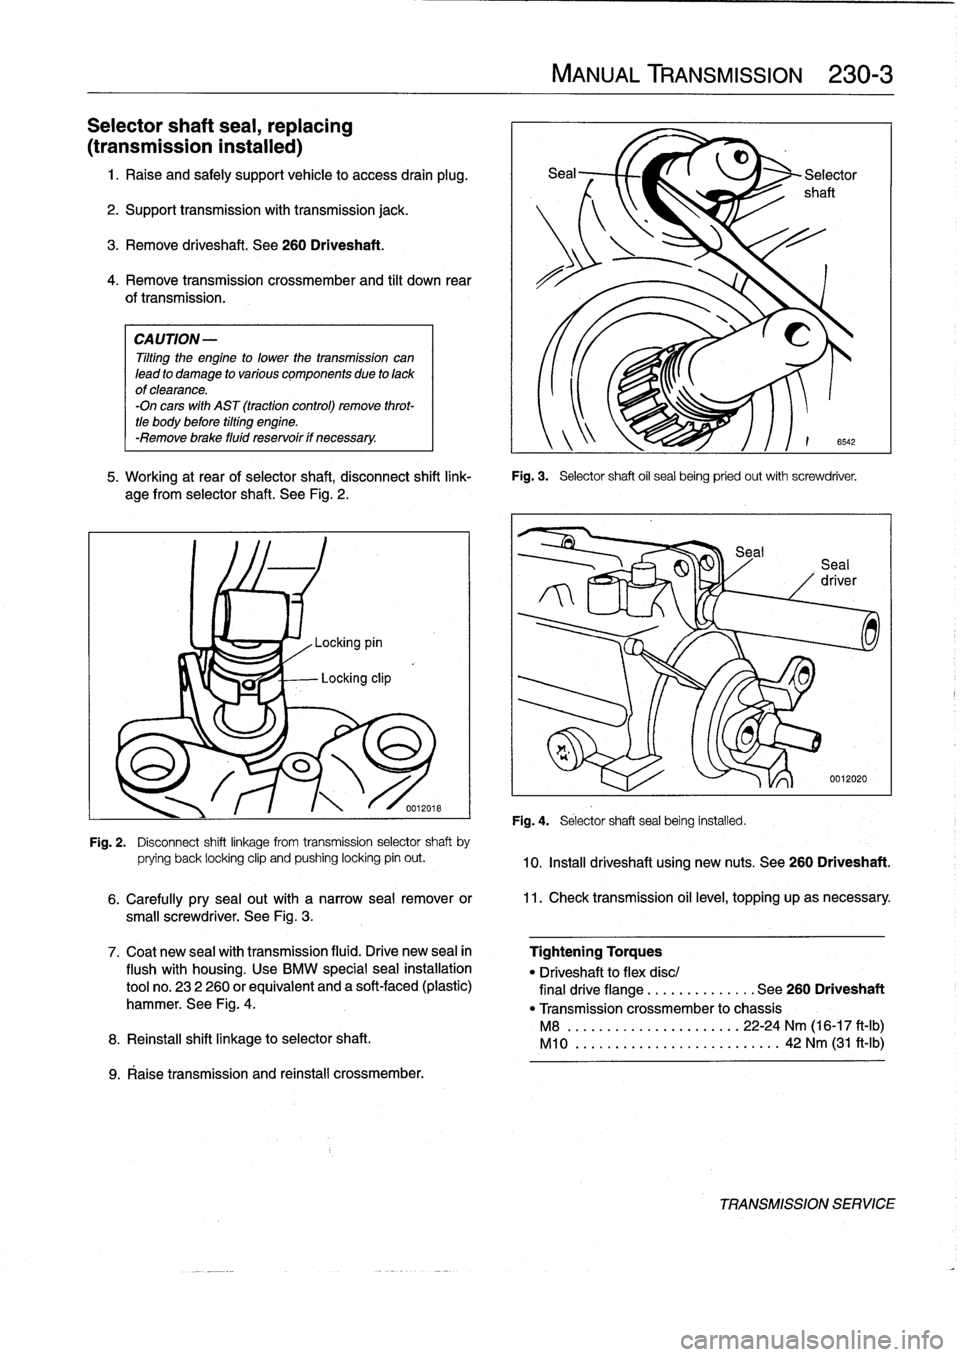 BMW 328i 1998 E36 User Guide 
Selector
shaft
seal,
replacing

(transmission
instalied)

1
.
Raise
and
safely
support
vehicle
to
access
drain
plug
.

2
.
Support
transmission
with
transmission
jack
.

3
.
Remove
driveshaft
.
See
2